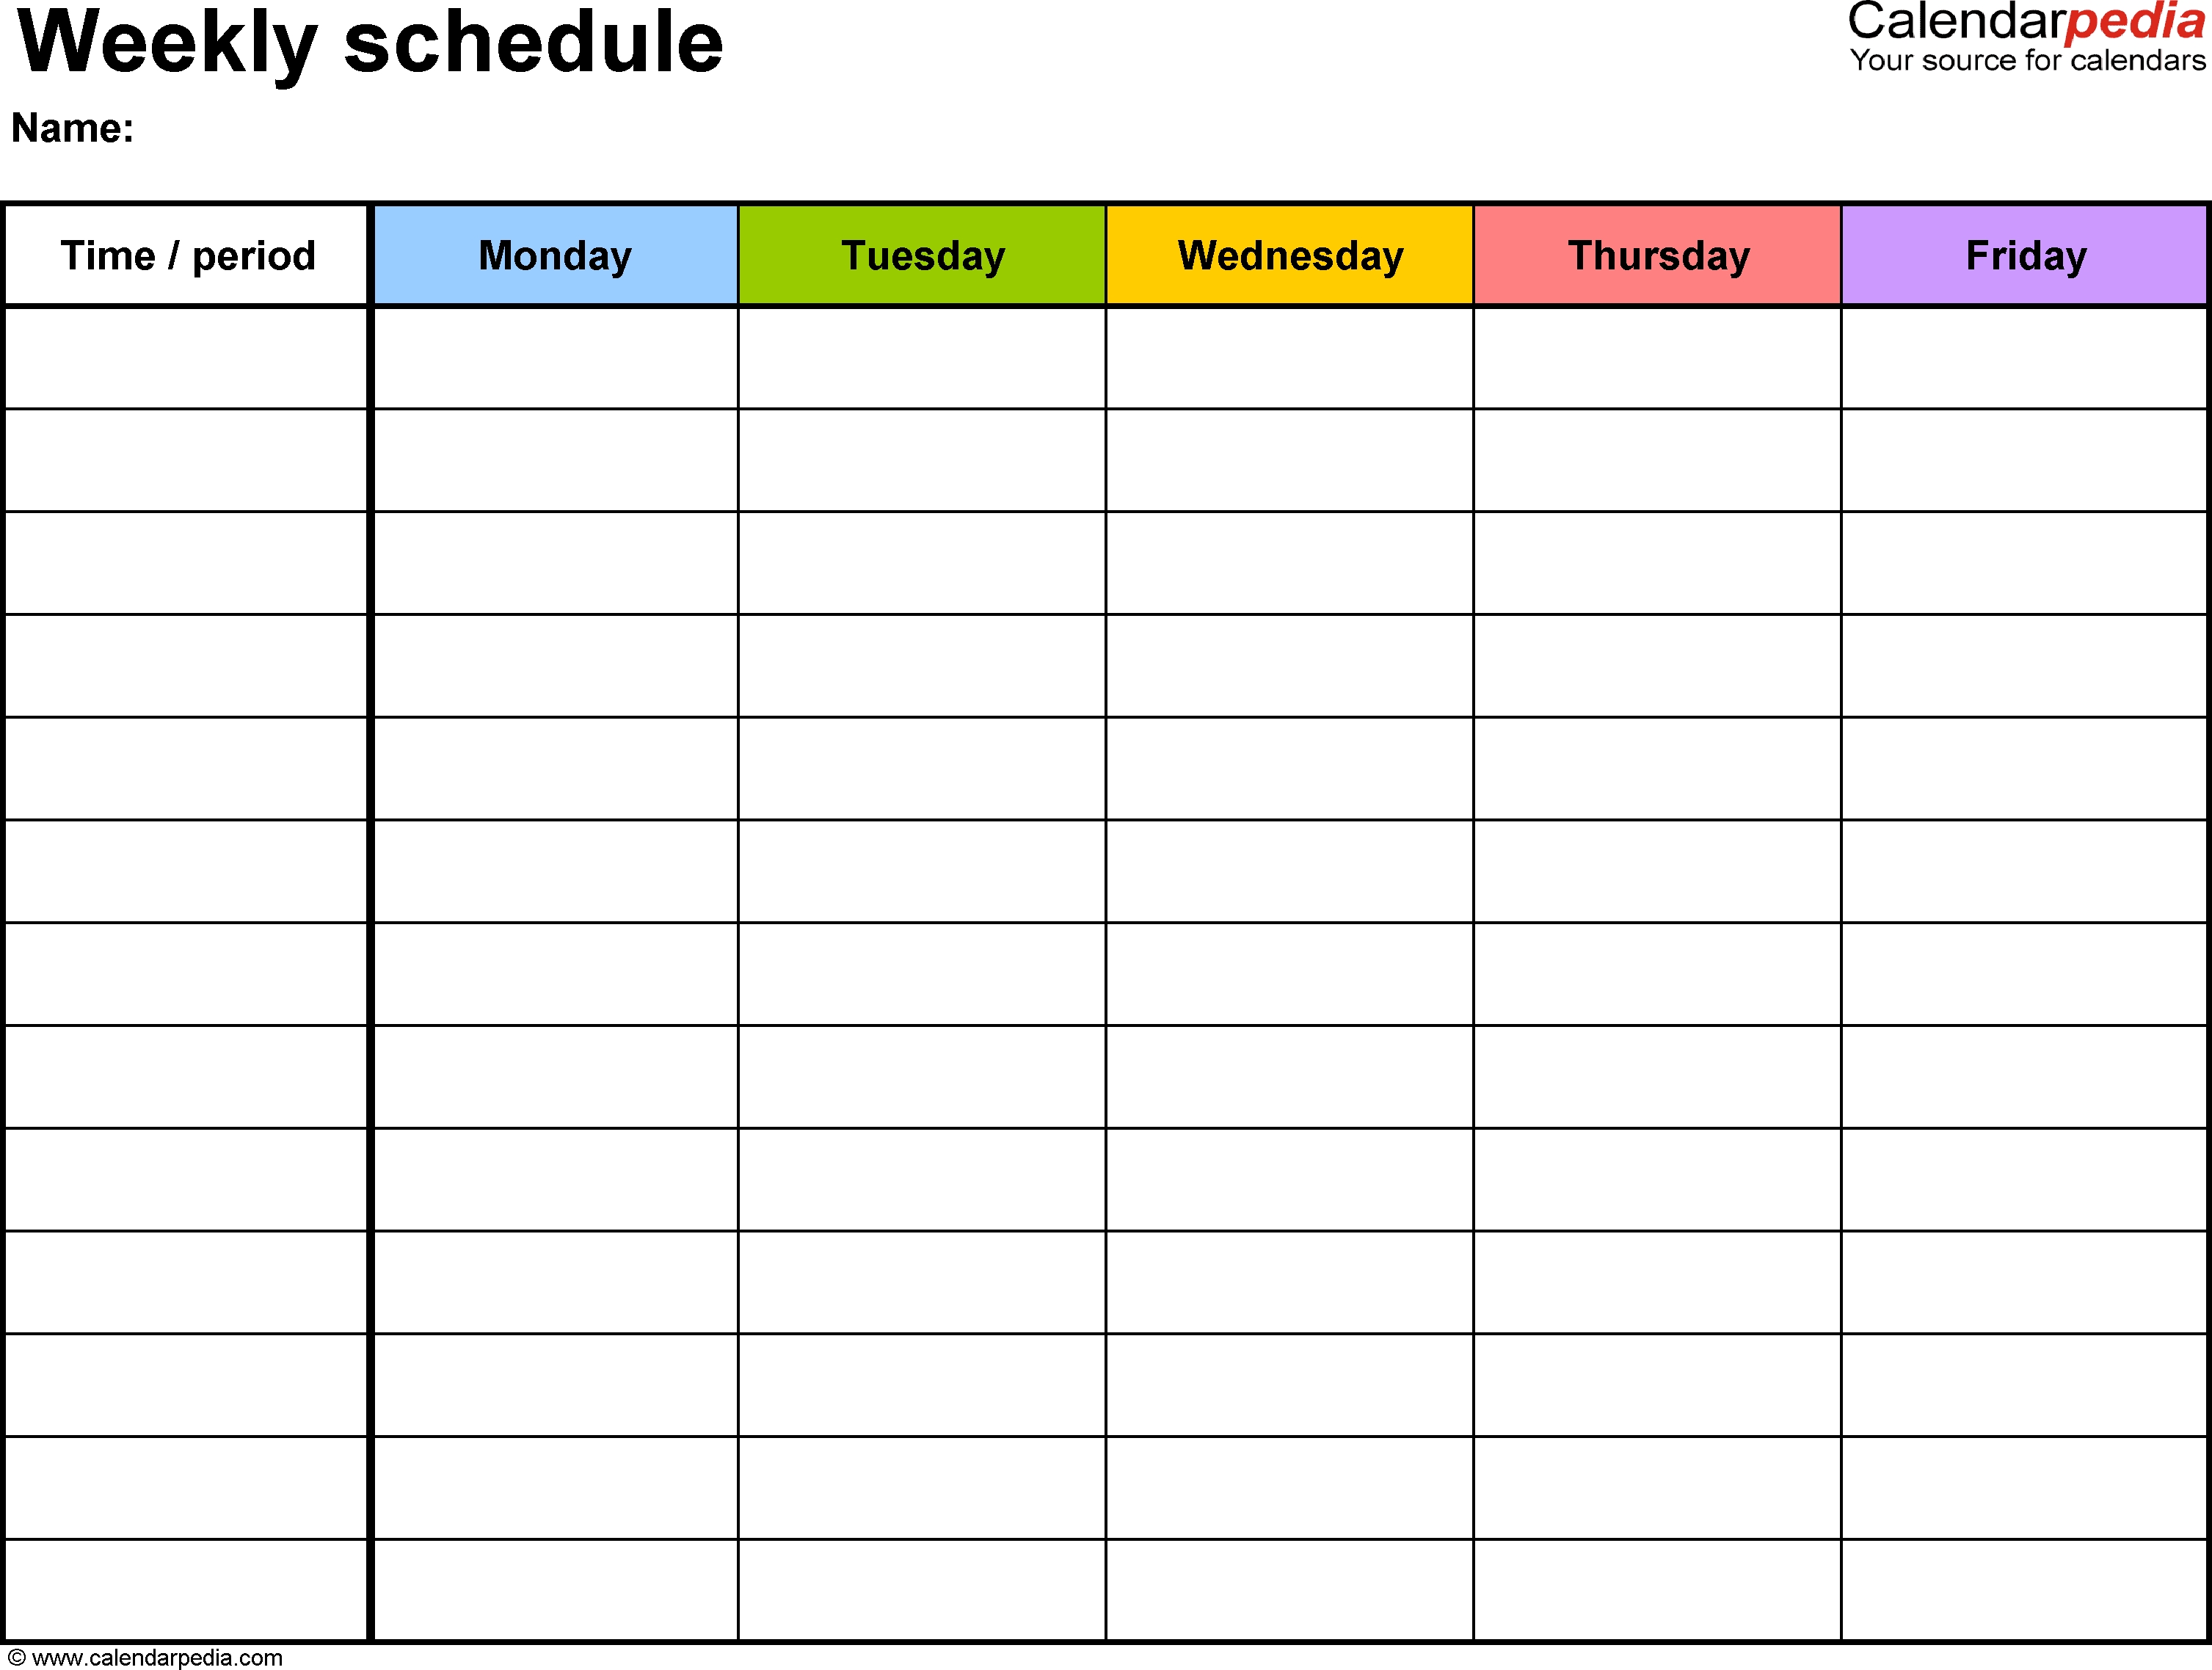 Free Weekly Schedule Templates For Word - 18 Templates for 5 Day Planner Template Free